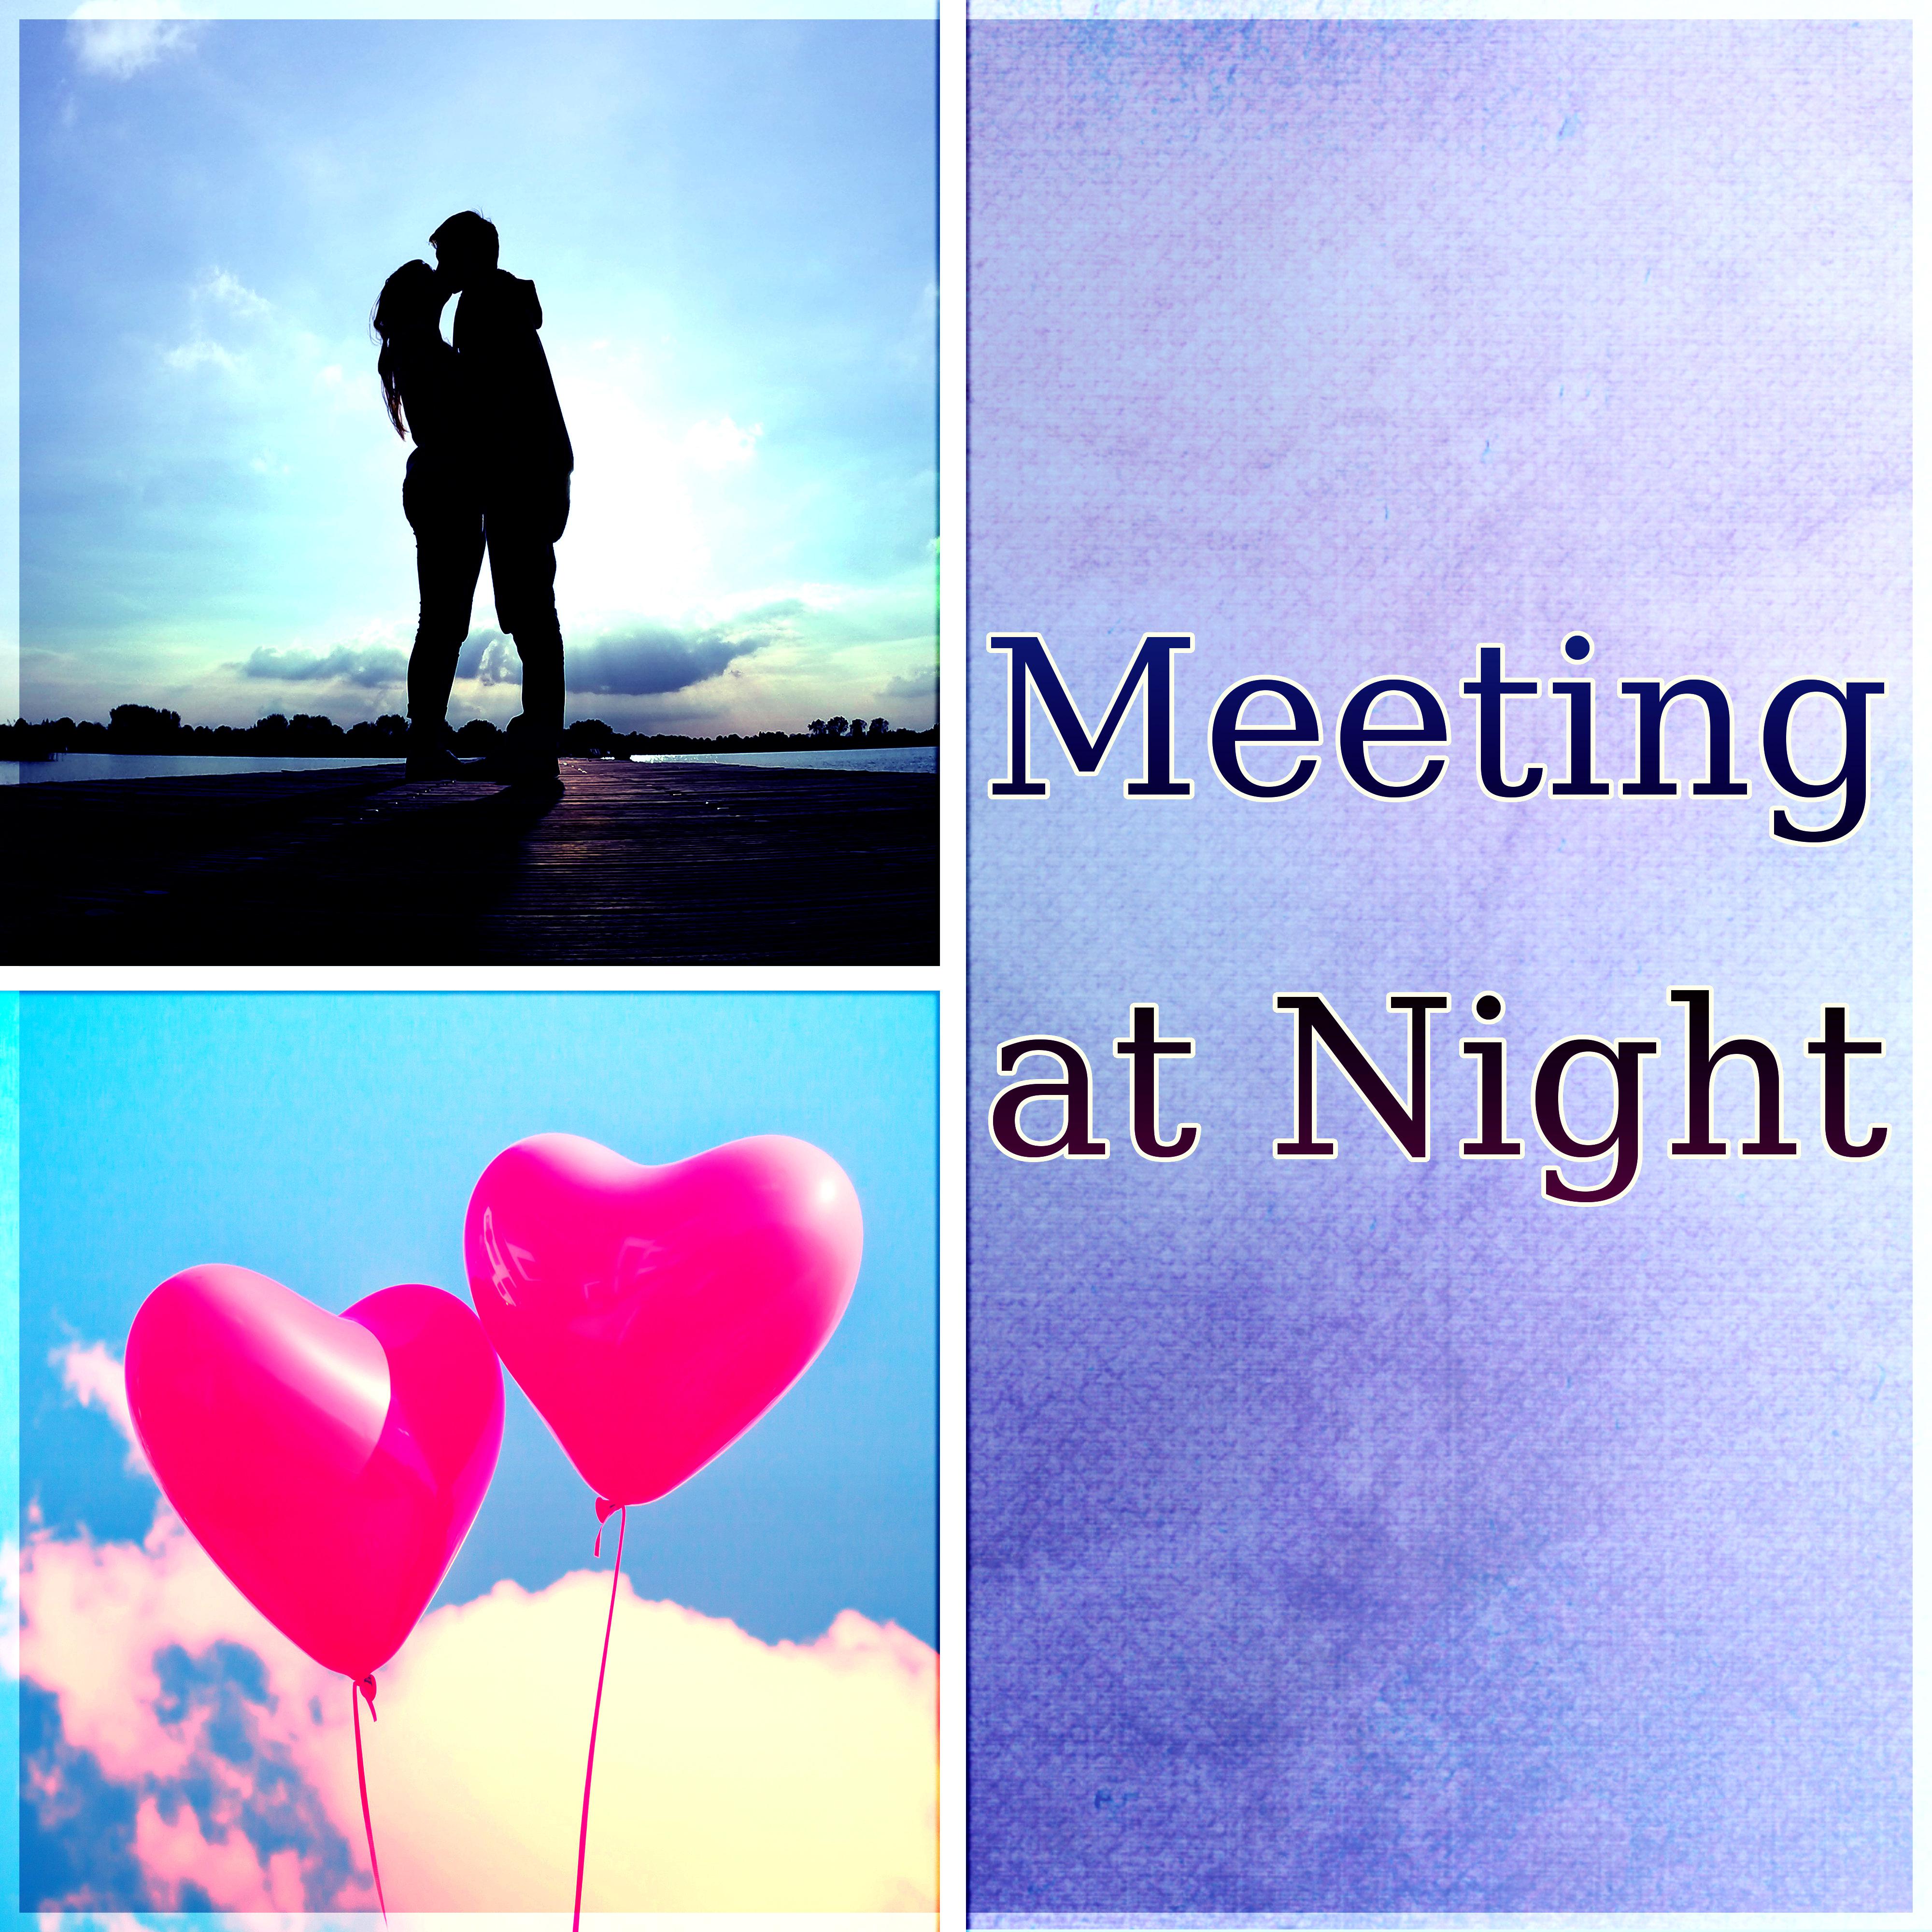 Meeting at Night - **** Songs, Background Piano, Shades of Love, Happy Hour, Romantic Music